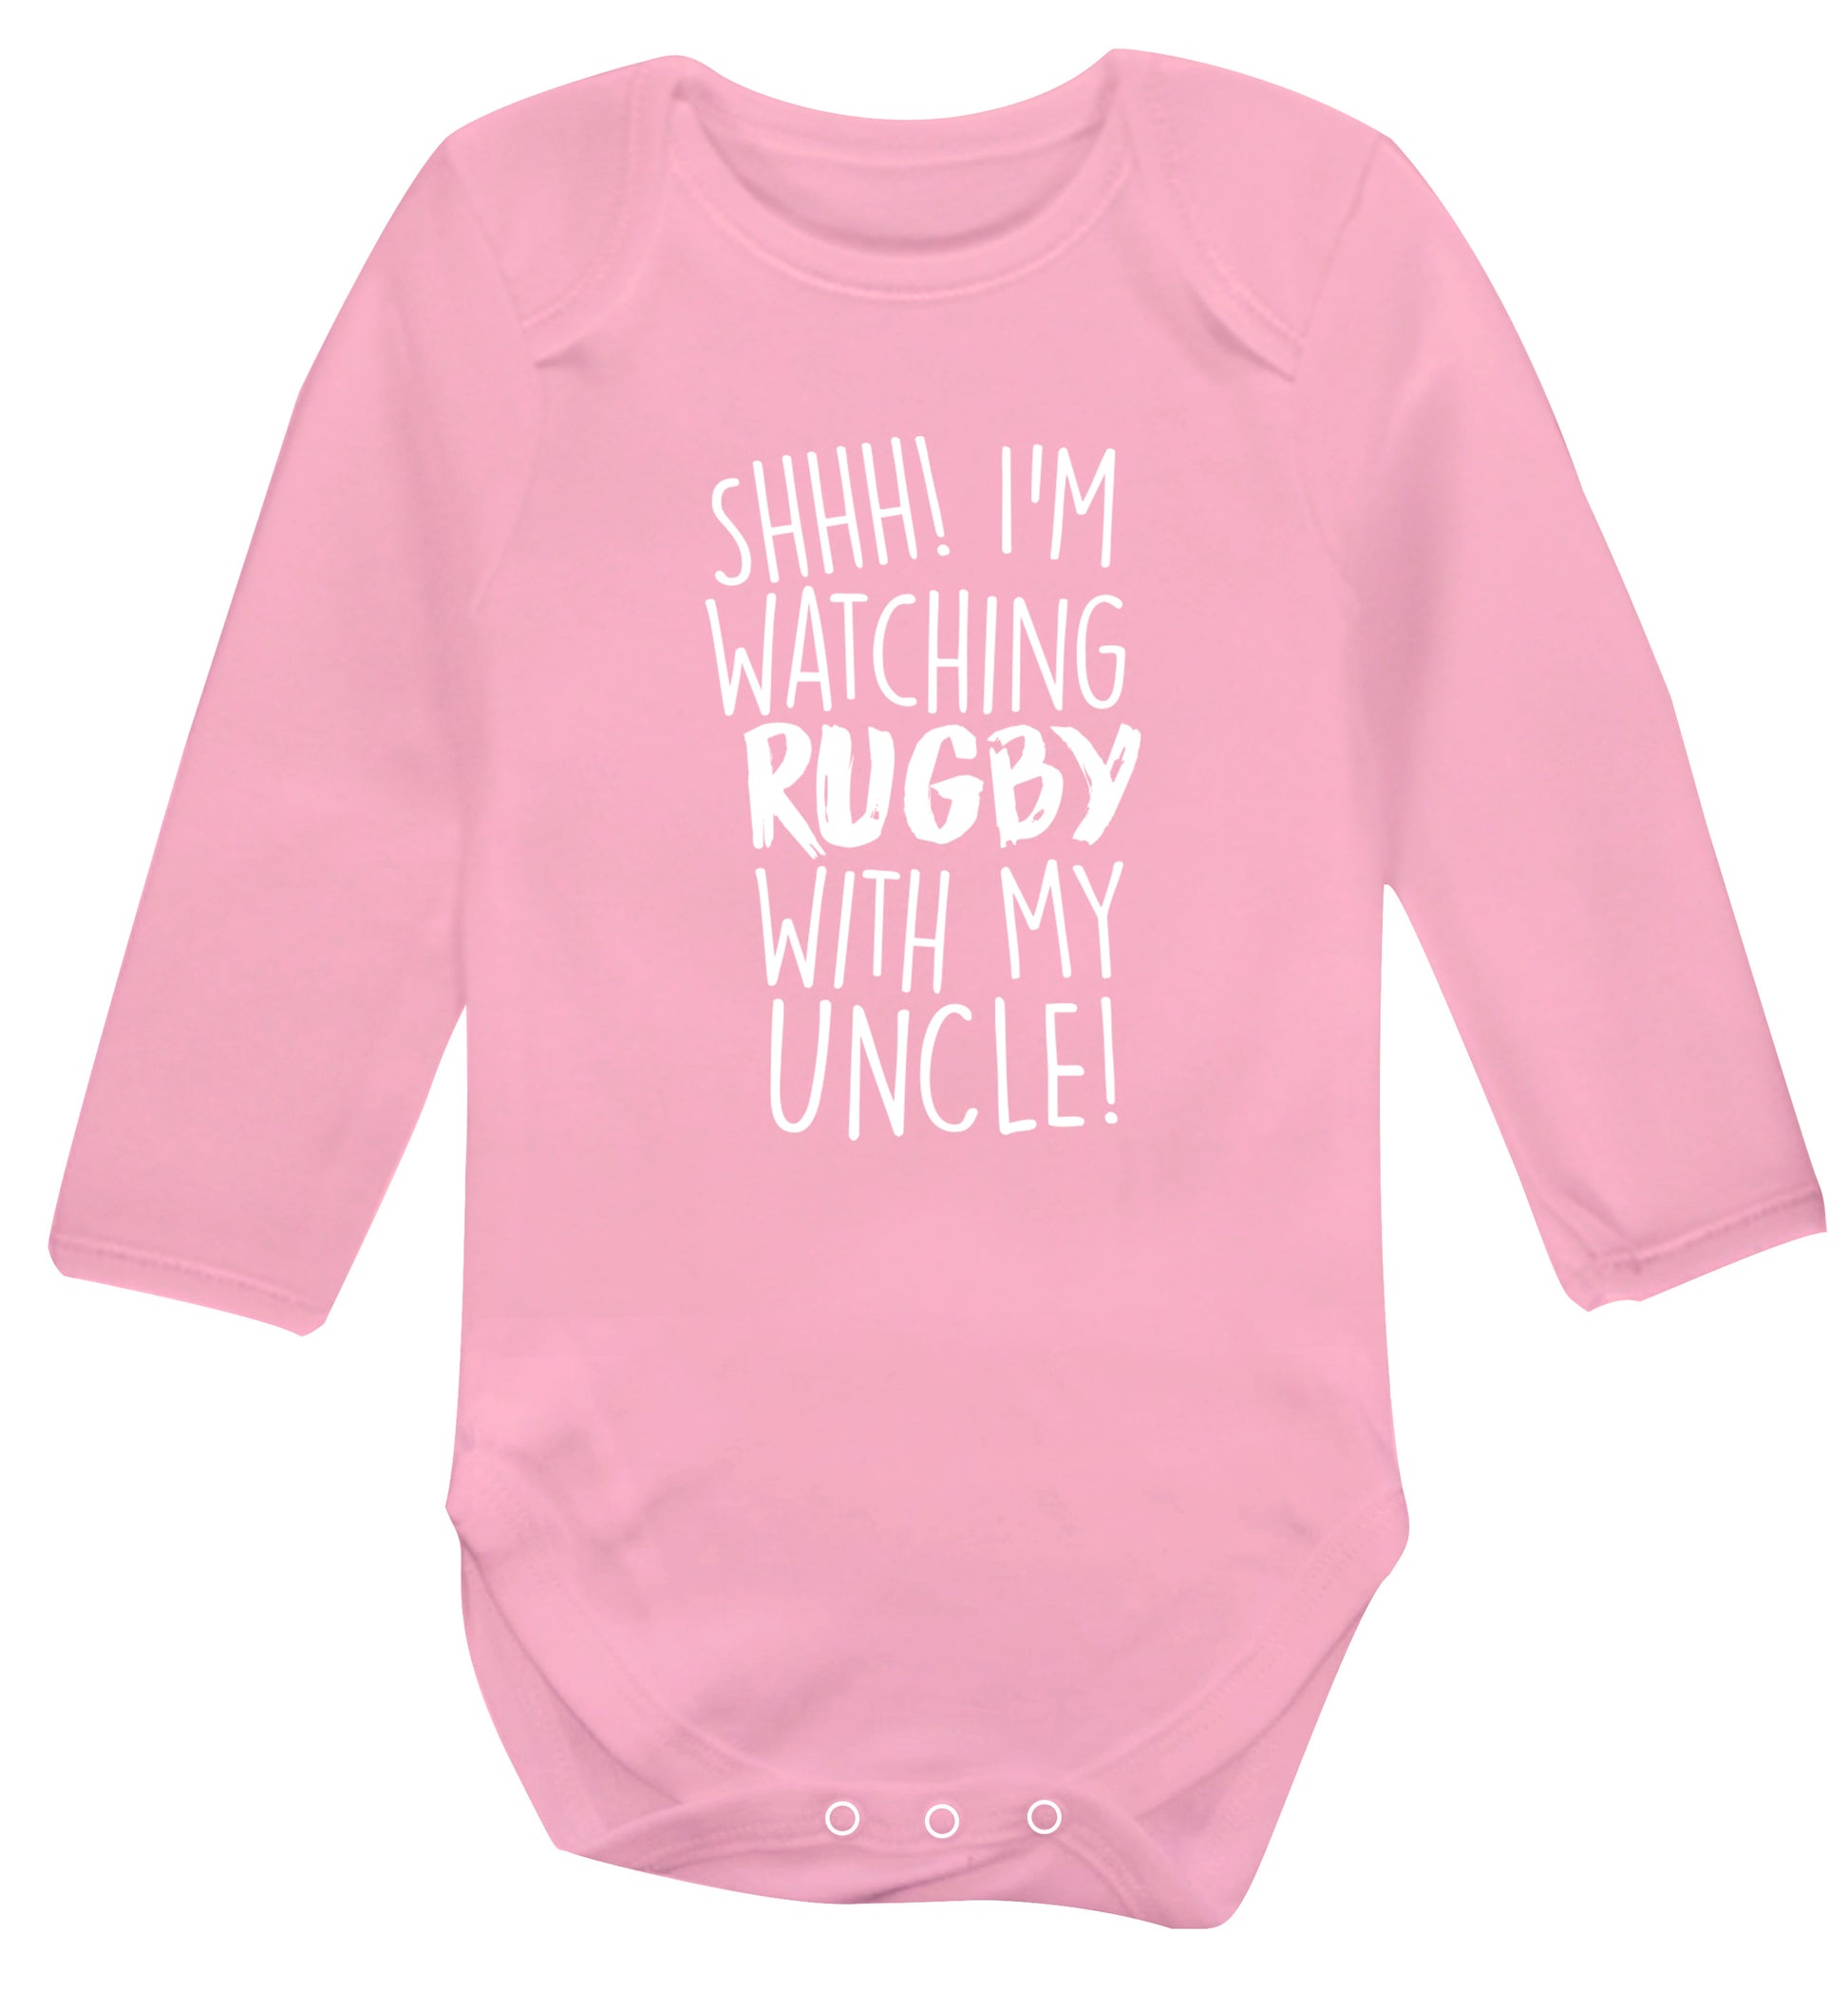 Shh.. I'm watching rugby with my uncle Baby Vest long sleeved pale pink 6-12 months